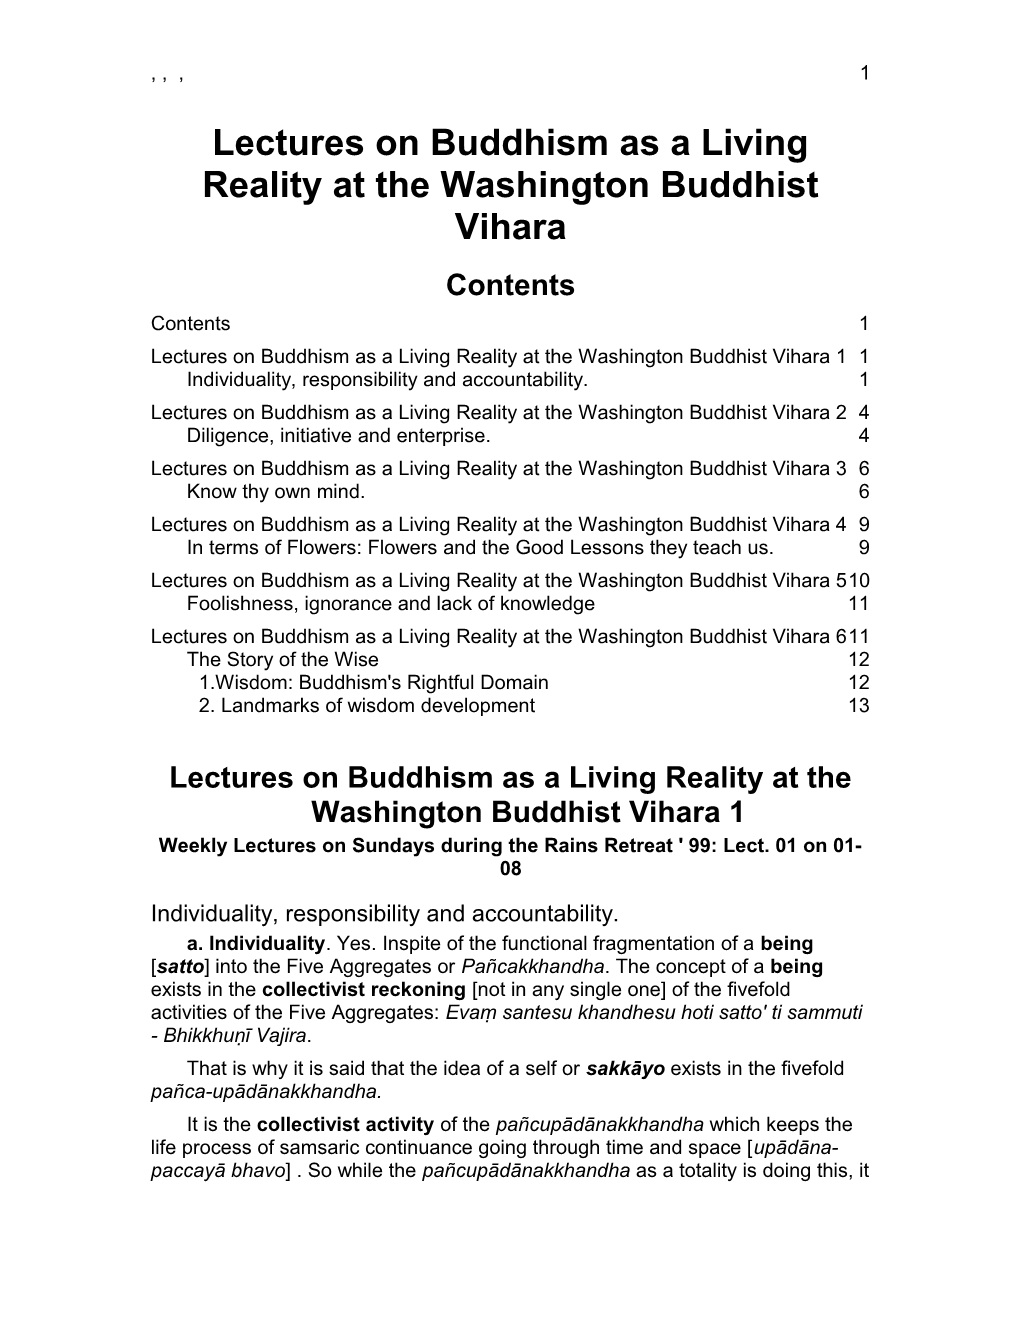 Lectures on Buddhism As a Living Reality at the Washington Buddhist Vihara